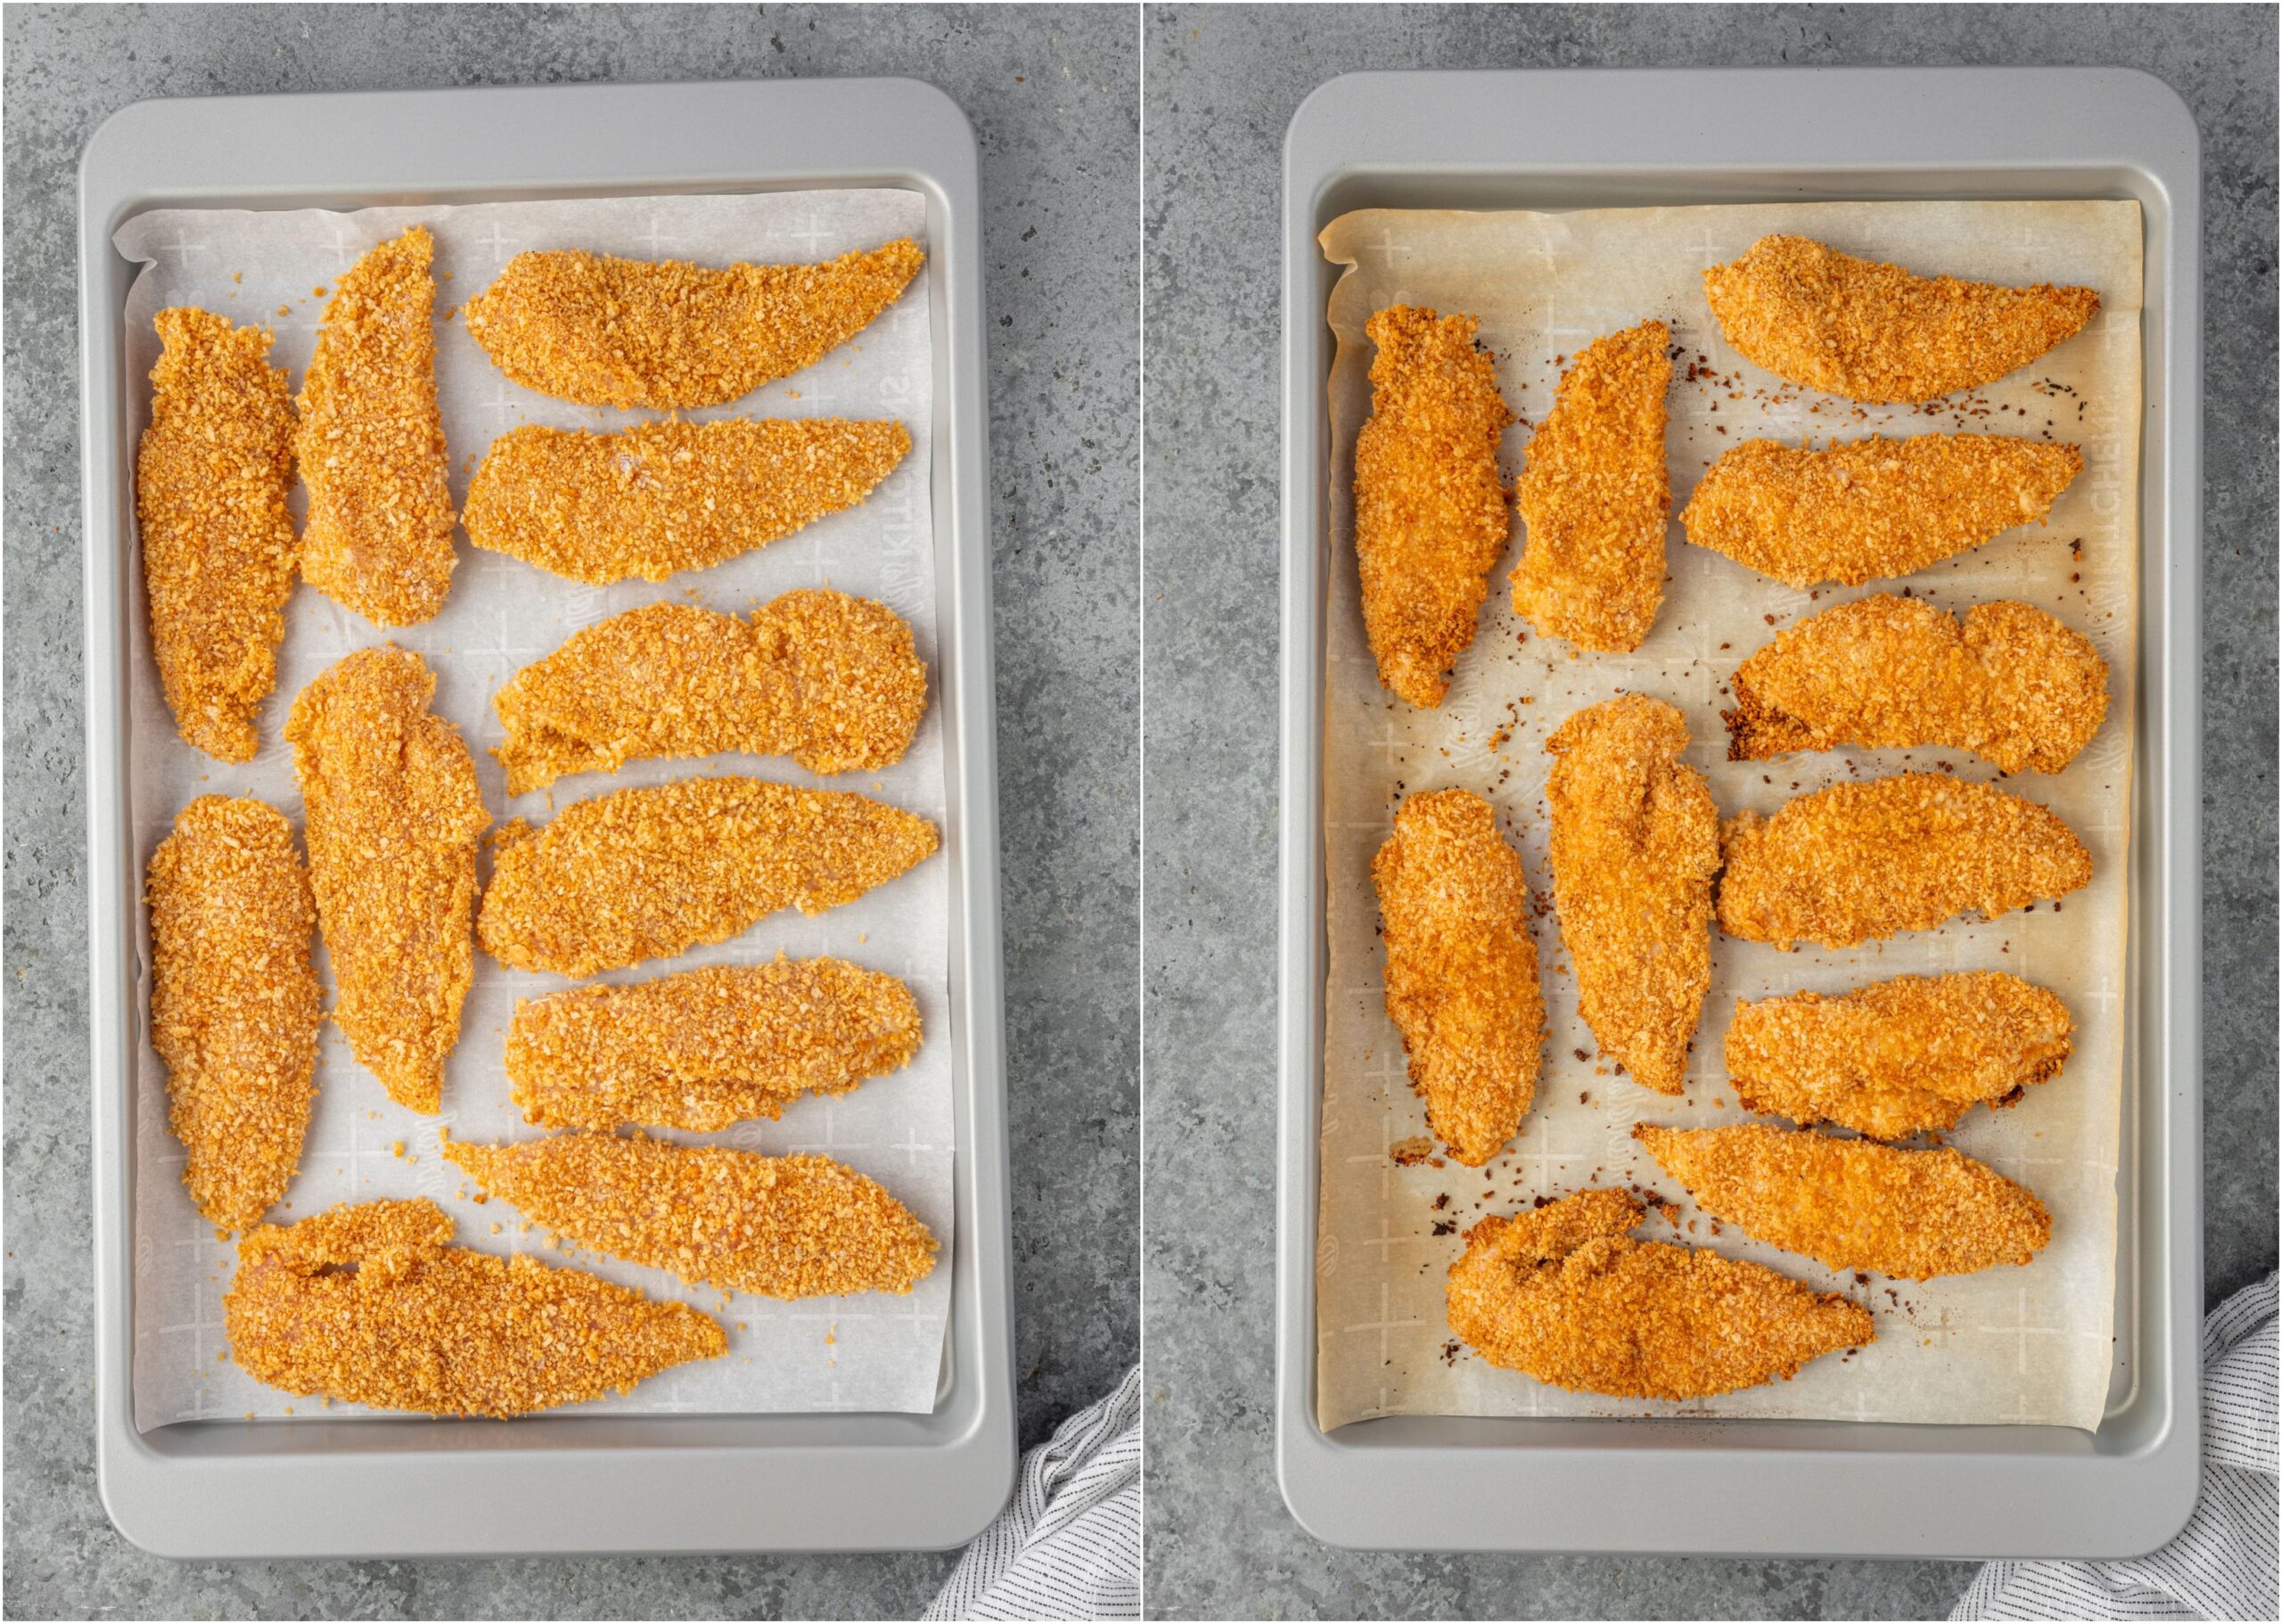 Chicken tenders on a pan before and after being baked.